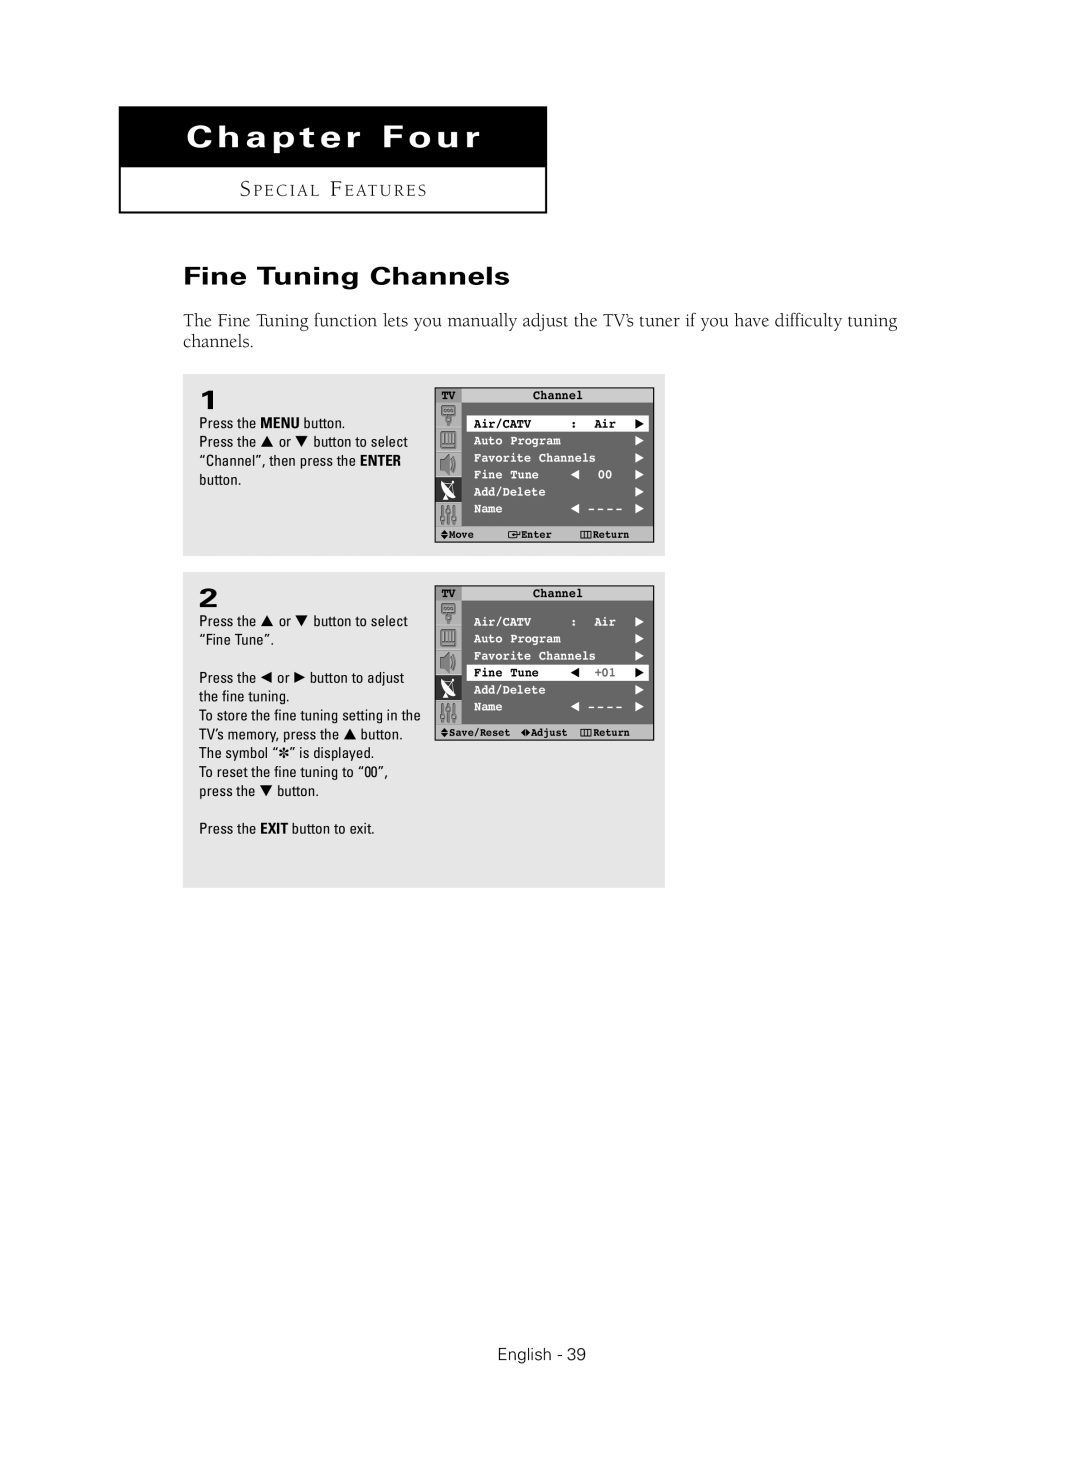 Samsung HC-P4241W manual Chapter Four, Fine Tuning Channels, S P E C I A L F E At U R E S, English 